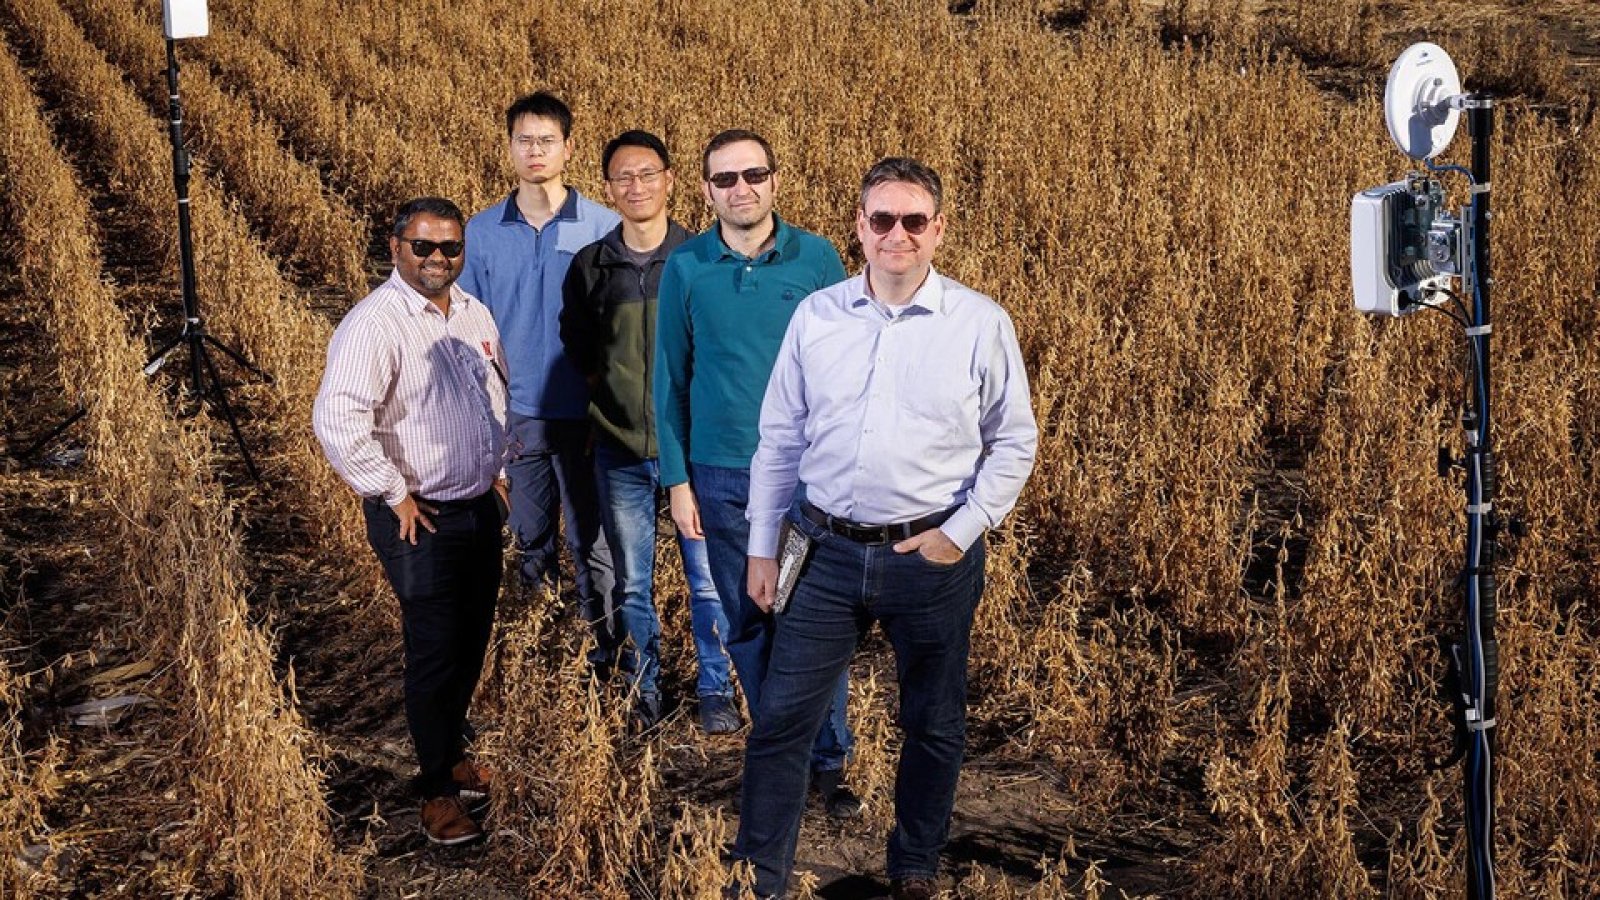 Members of the Field-Nets research team pose in a soybean field on East Campus with their millimeter wave radios with phased-array antennas. The researchers (from left) are Santosh Pitla, Qiang Liu, Yufeng Ge, Christos Argyropoulos and Mehmet Can Vuran. (Craig Chandler / University Communication and Marketing)